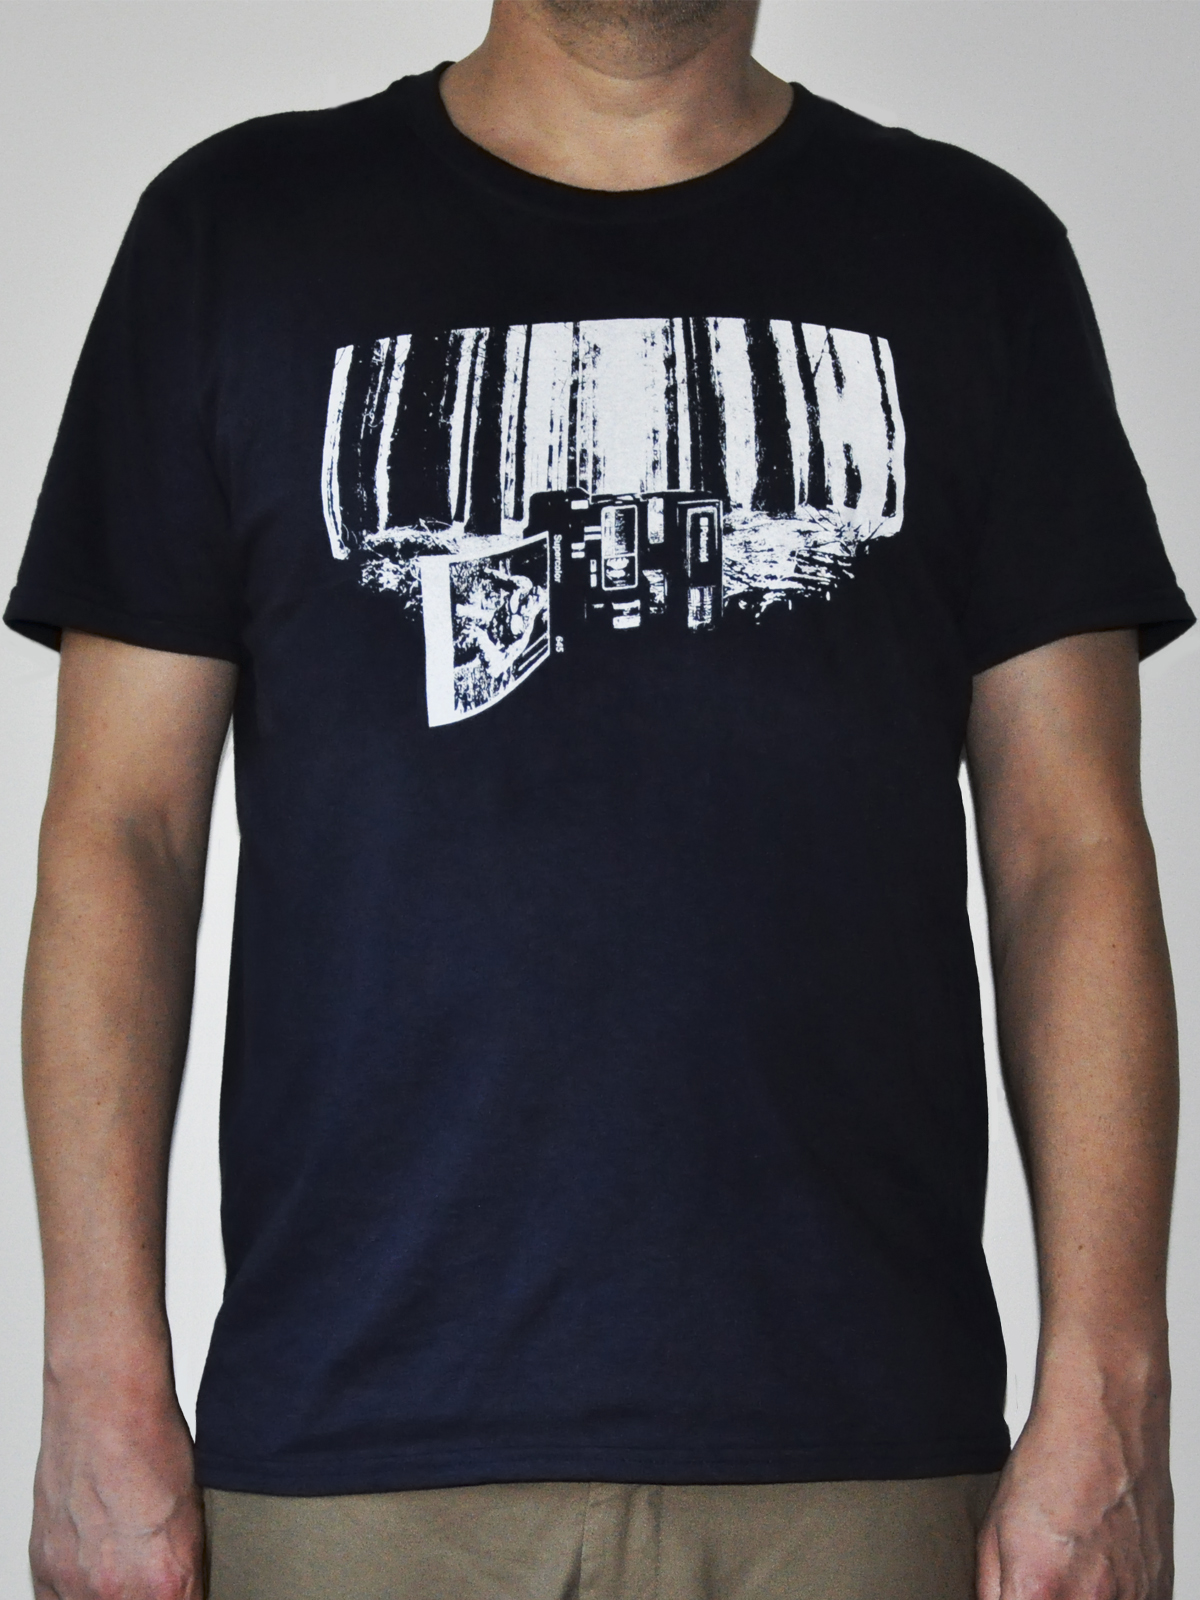 t-shirt depicting a polaroid camera on it's side in lonely woods presenting photo of angry yeti.